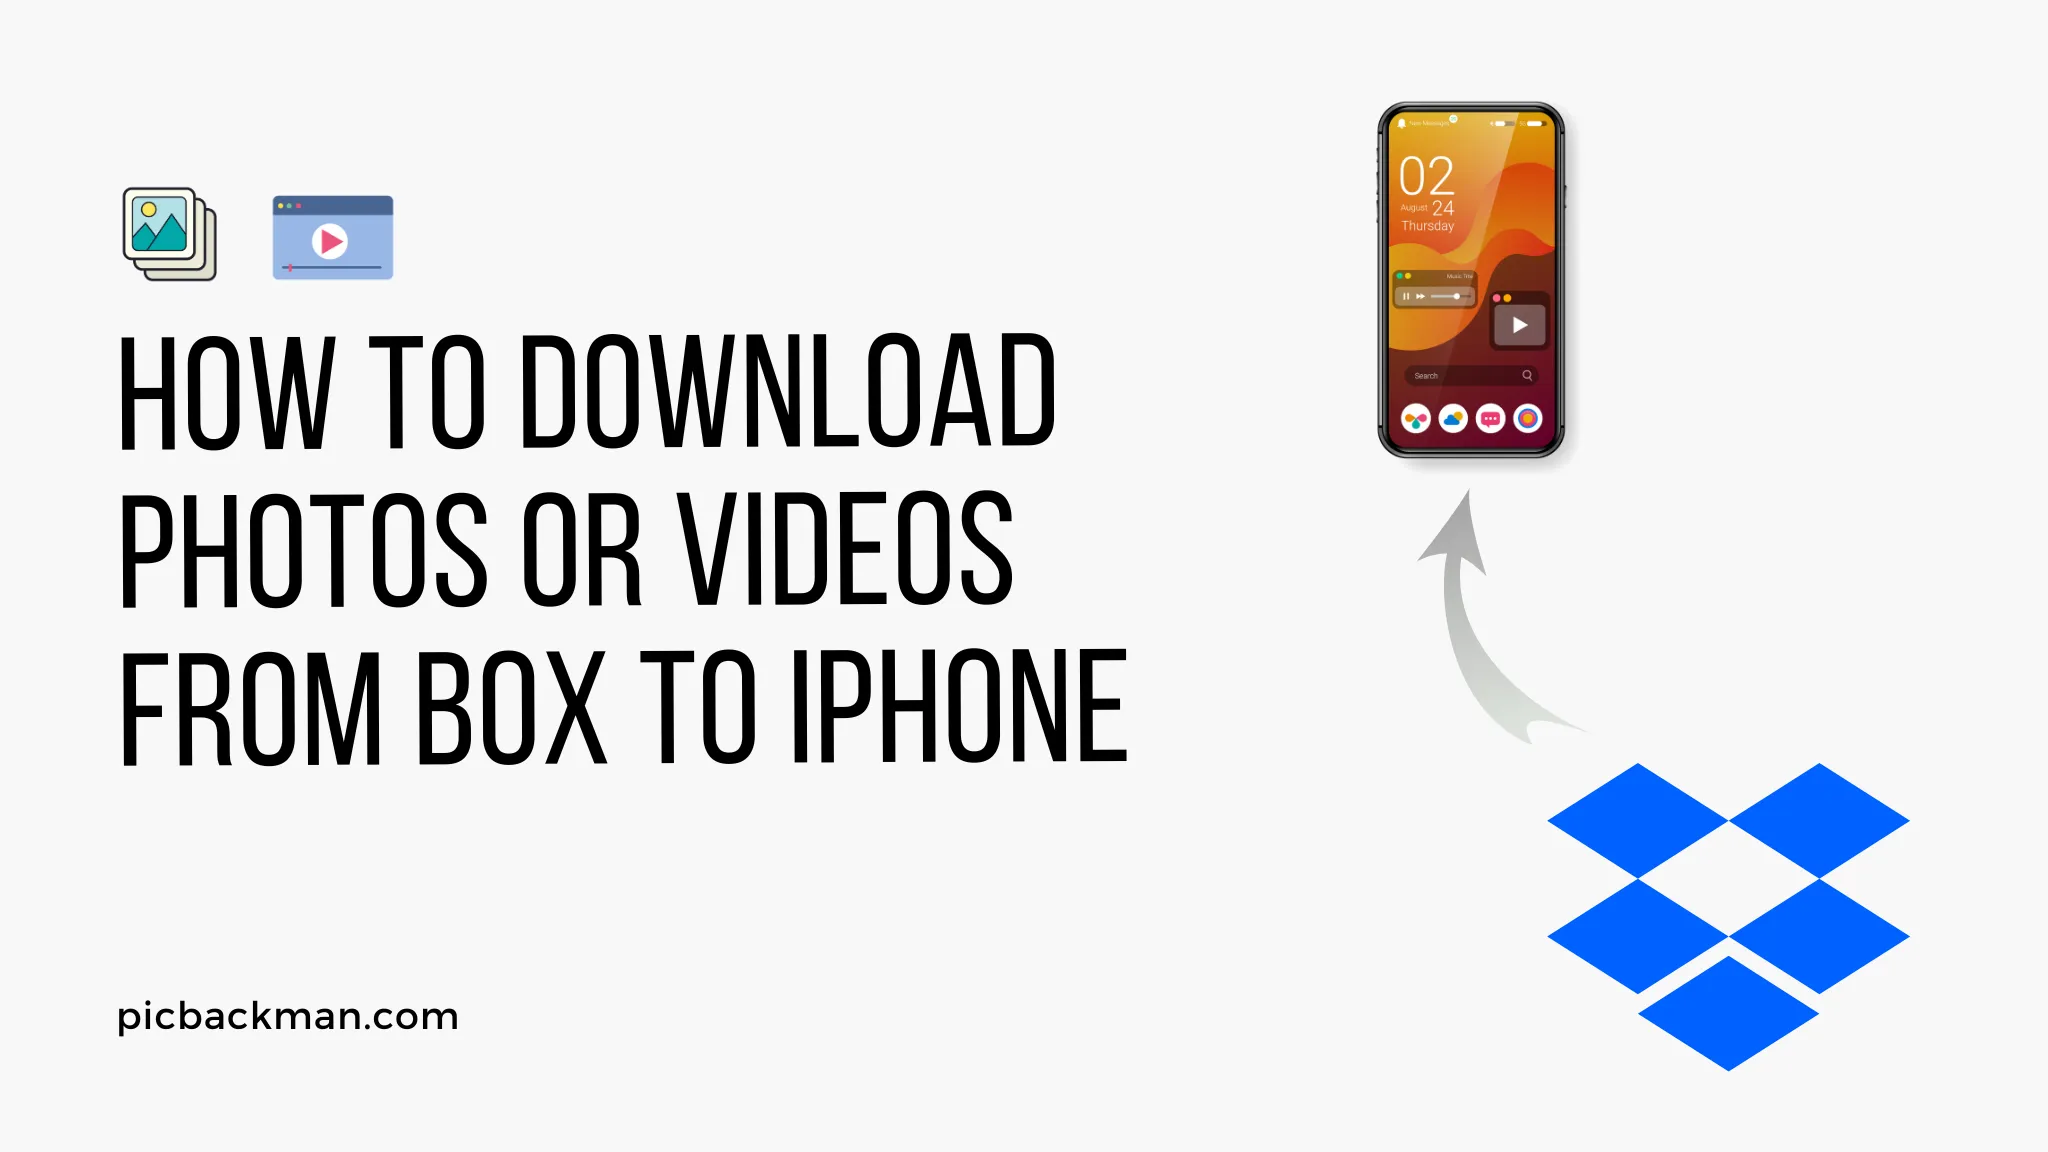 How to Download photos or Videos from Box to iPhone?